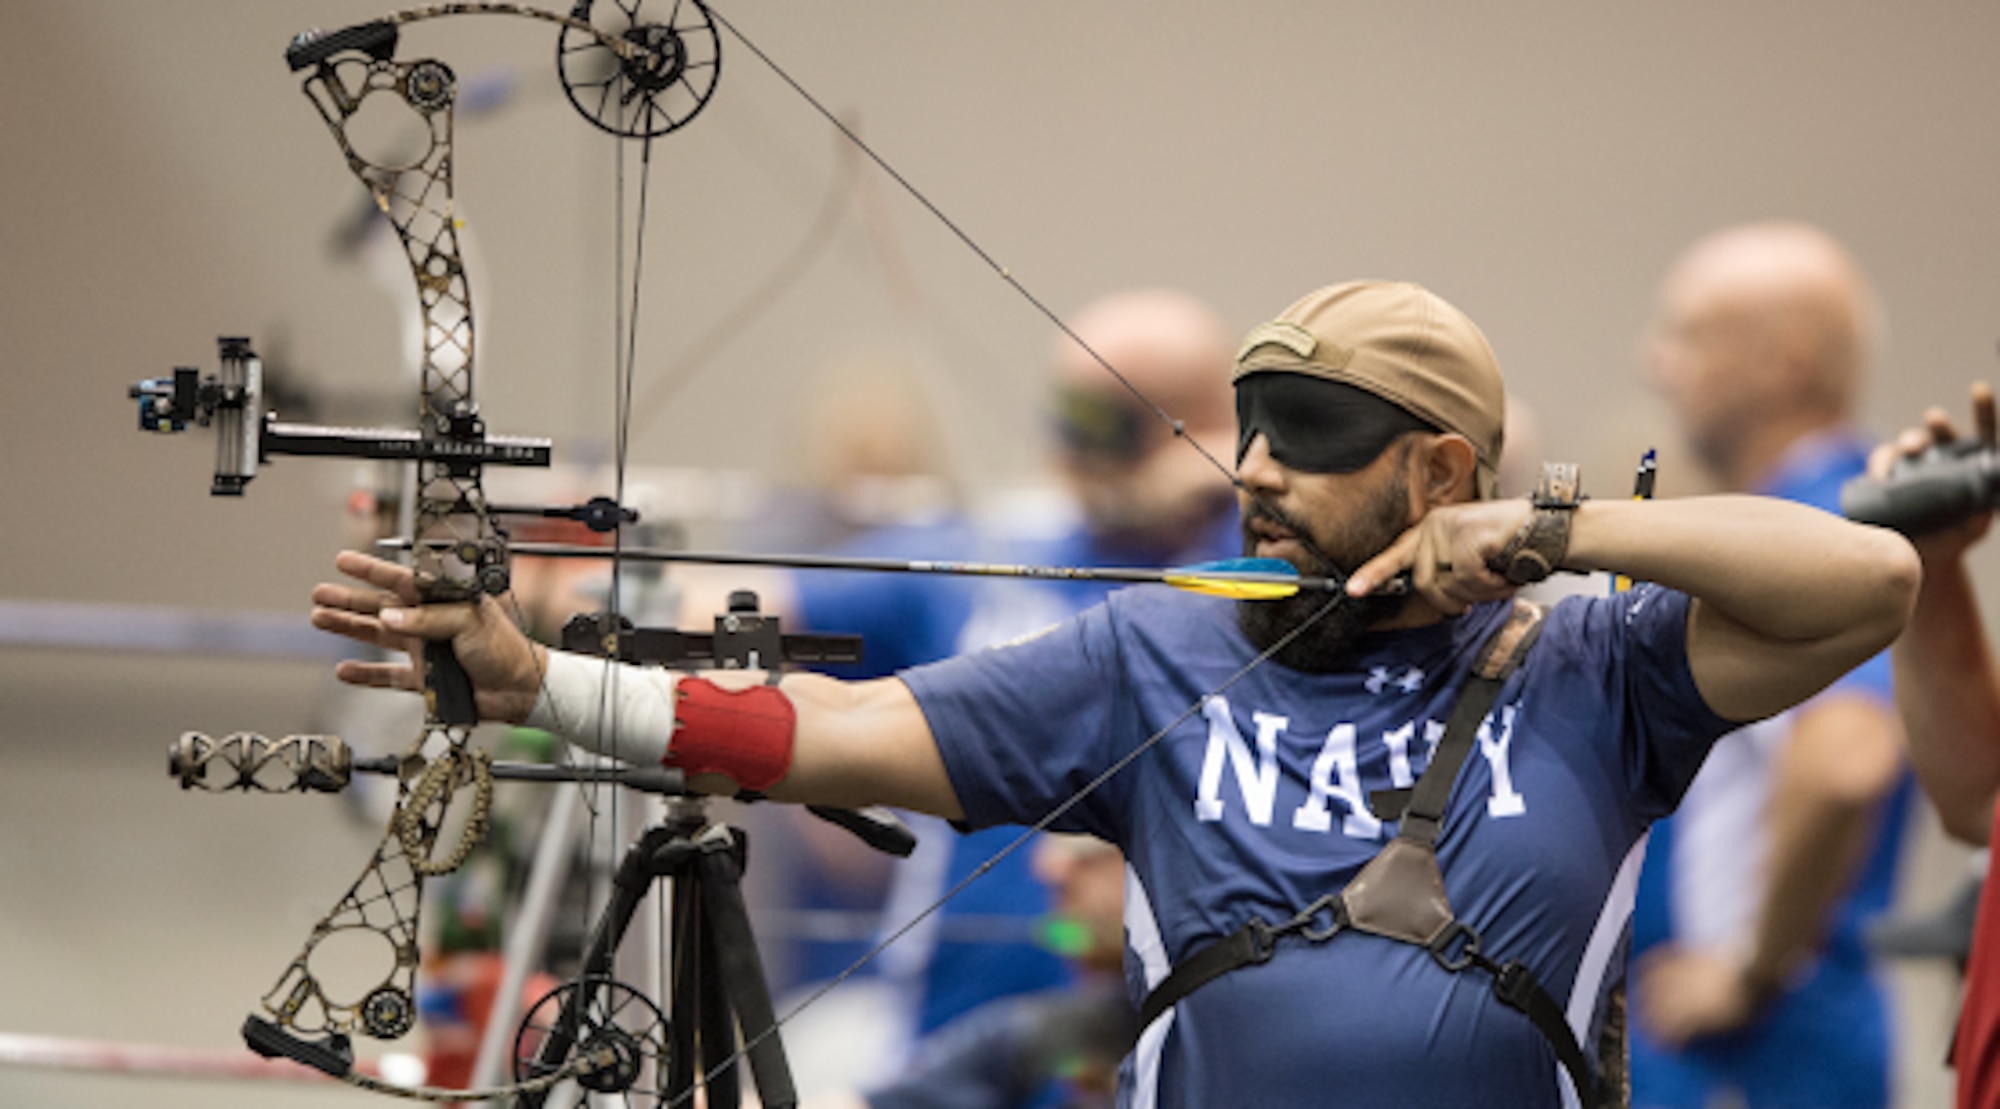 Warrior Games Athlete and Navy veteran, Petty Officer 2nd Class A.J. Mohammad, competes in an archery competition during the 2017 Warrior Games. Archery is one of 11 sports featured during the 2018 Department of Defense Warrior Games at the Air Force Academy from June 2 - 9. (DoD photo by EJ Hersom)